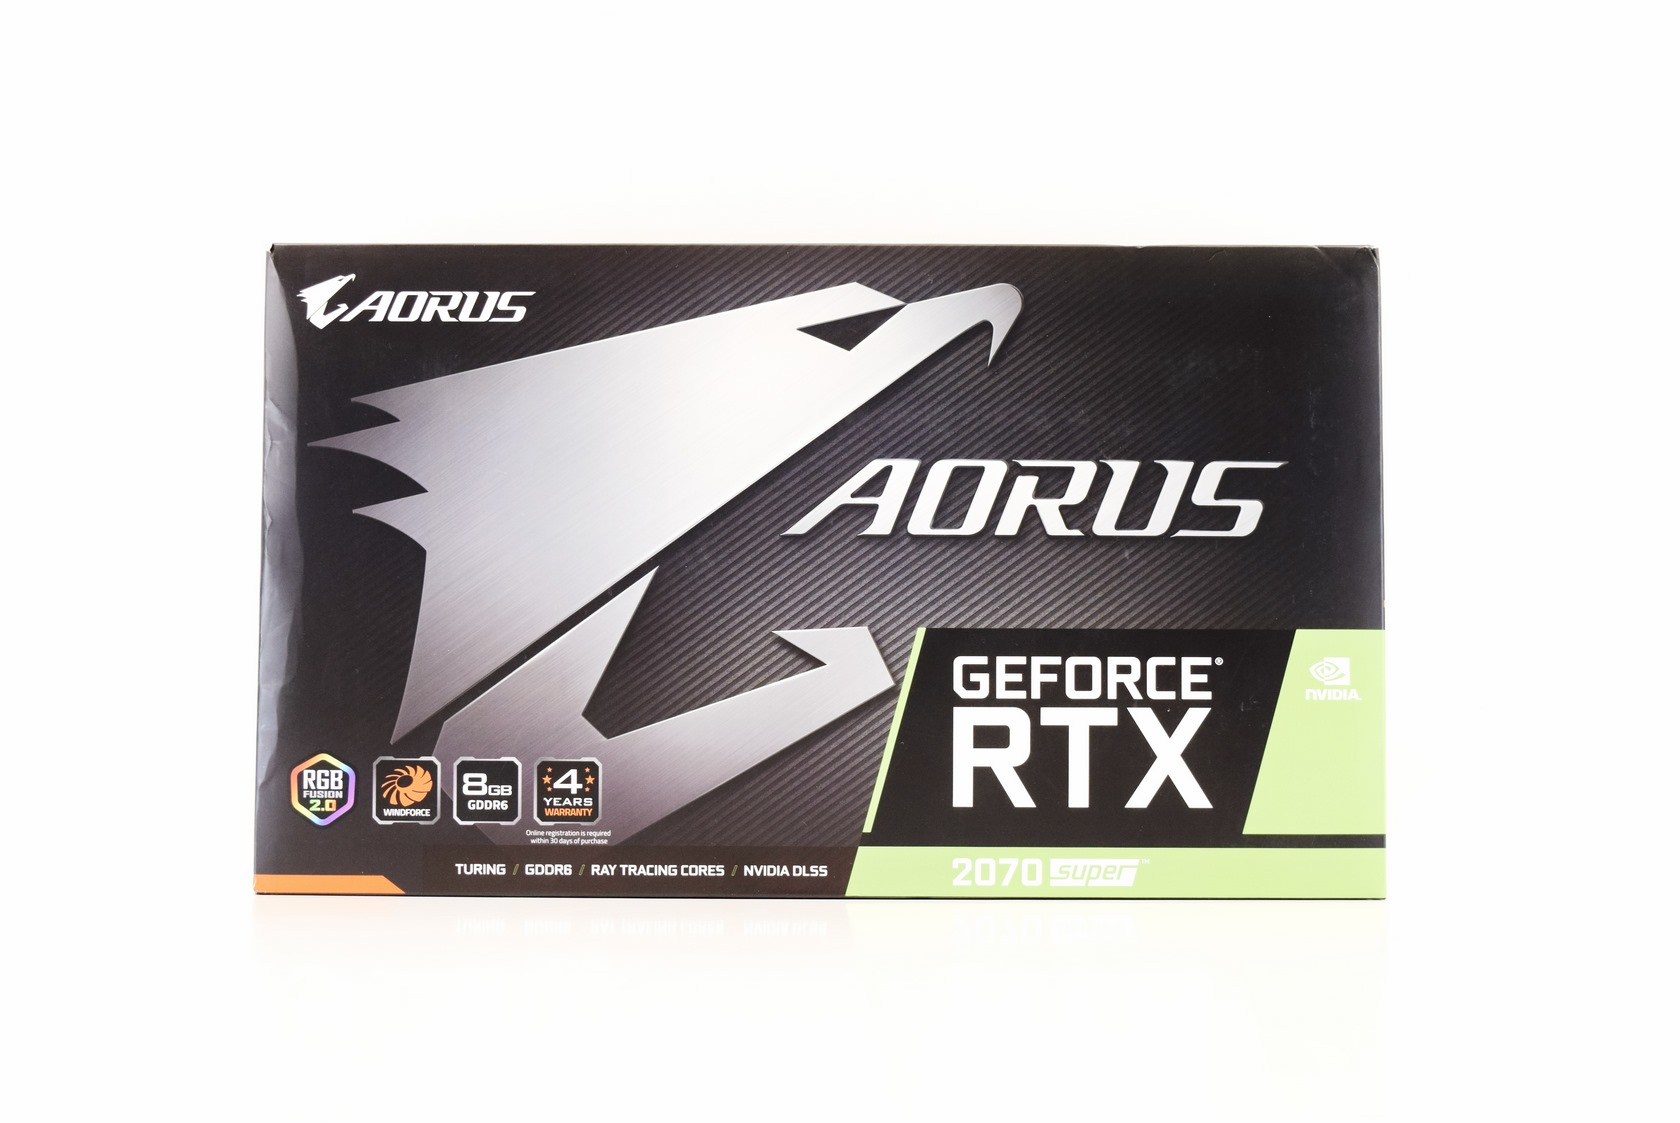 GIGABYTE AORUS GeForce RTX 2070 Super Graphics Card Review